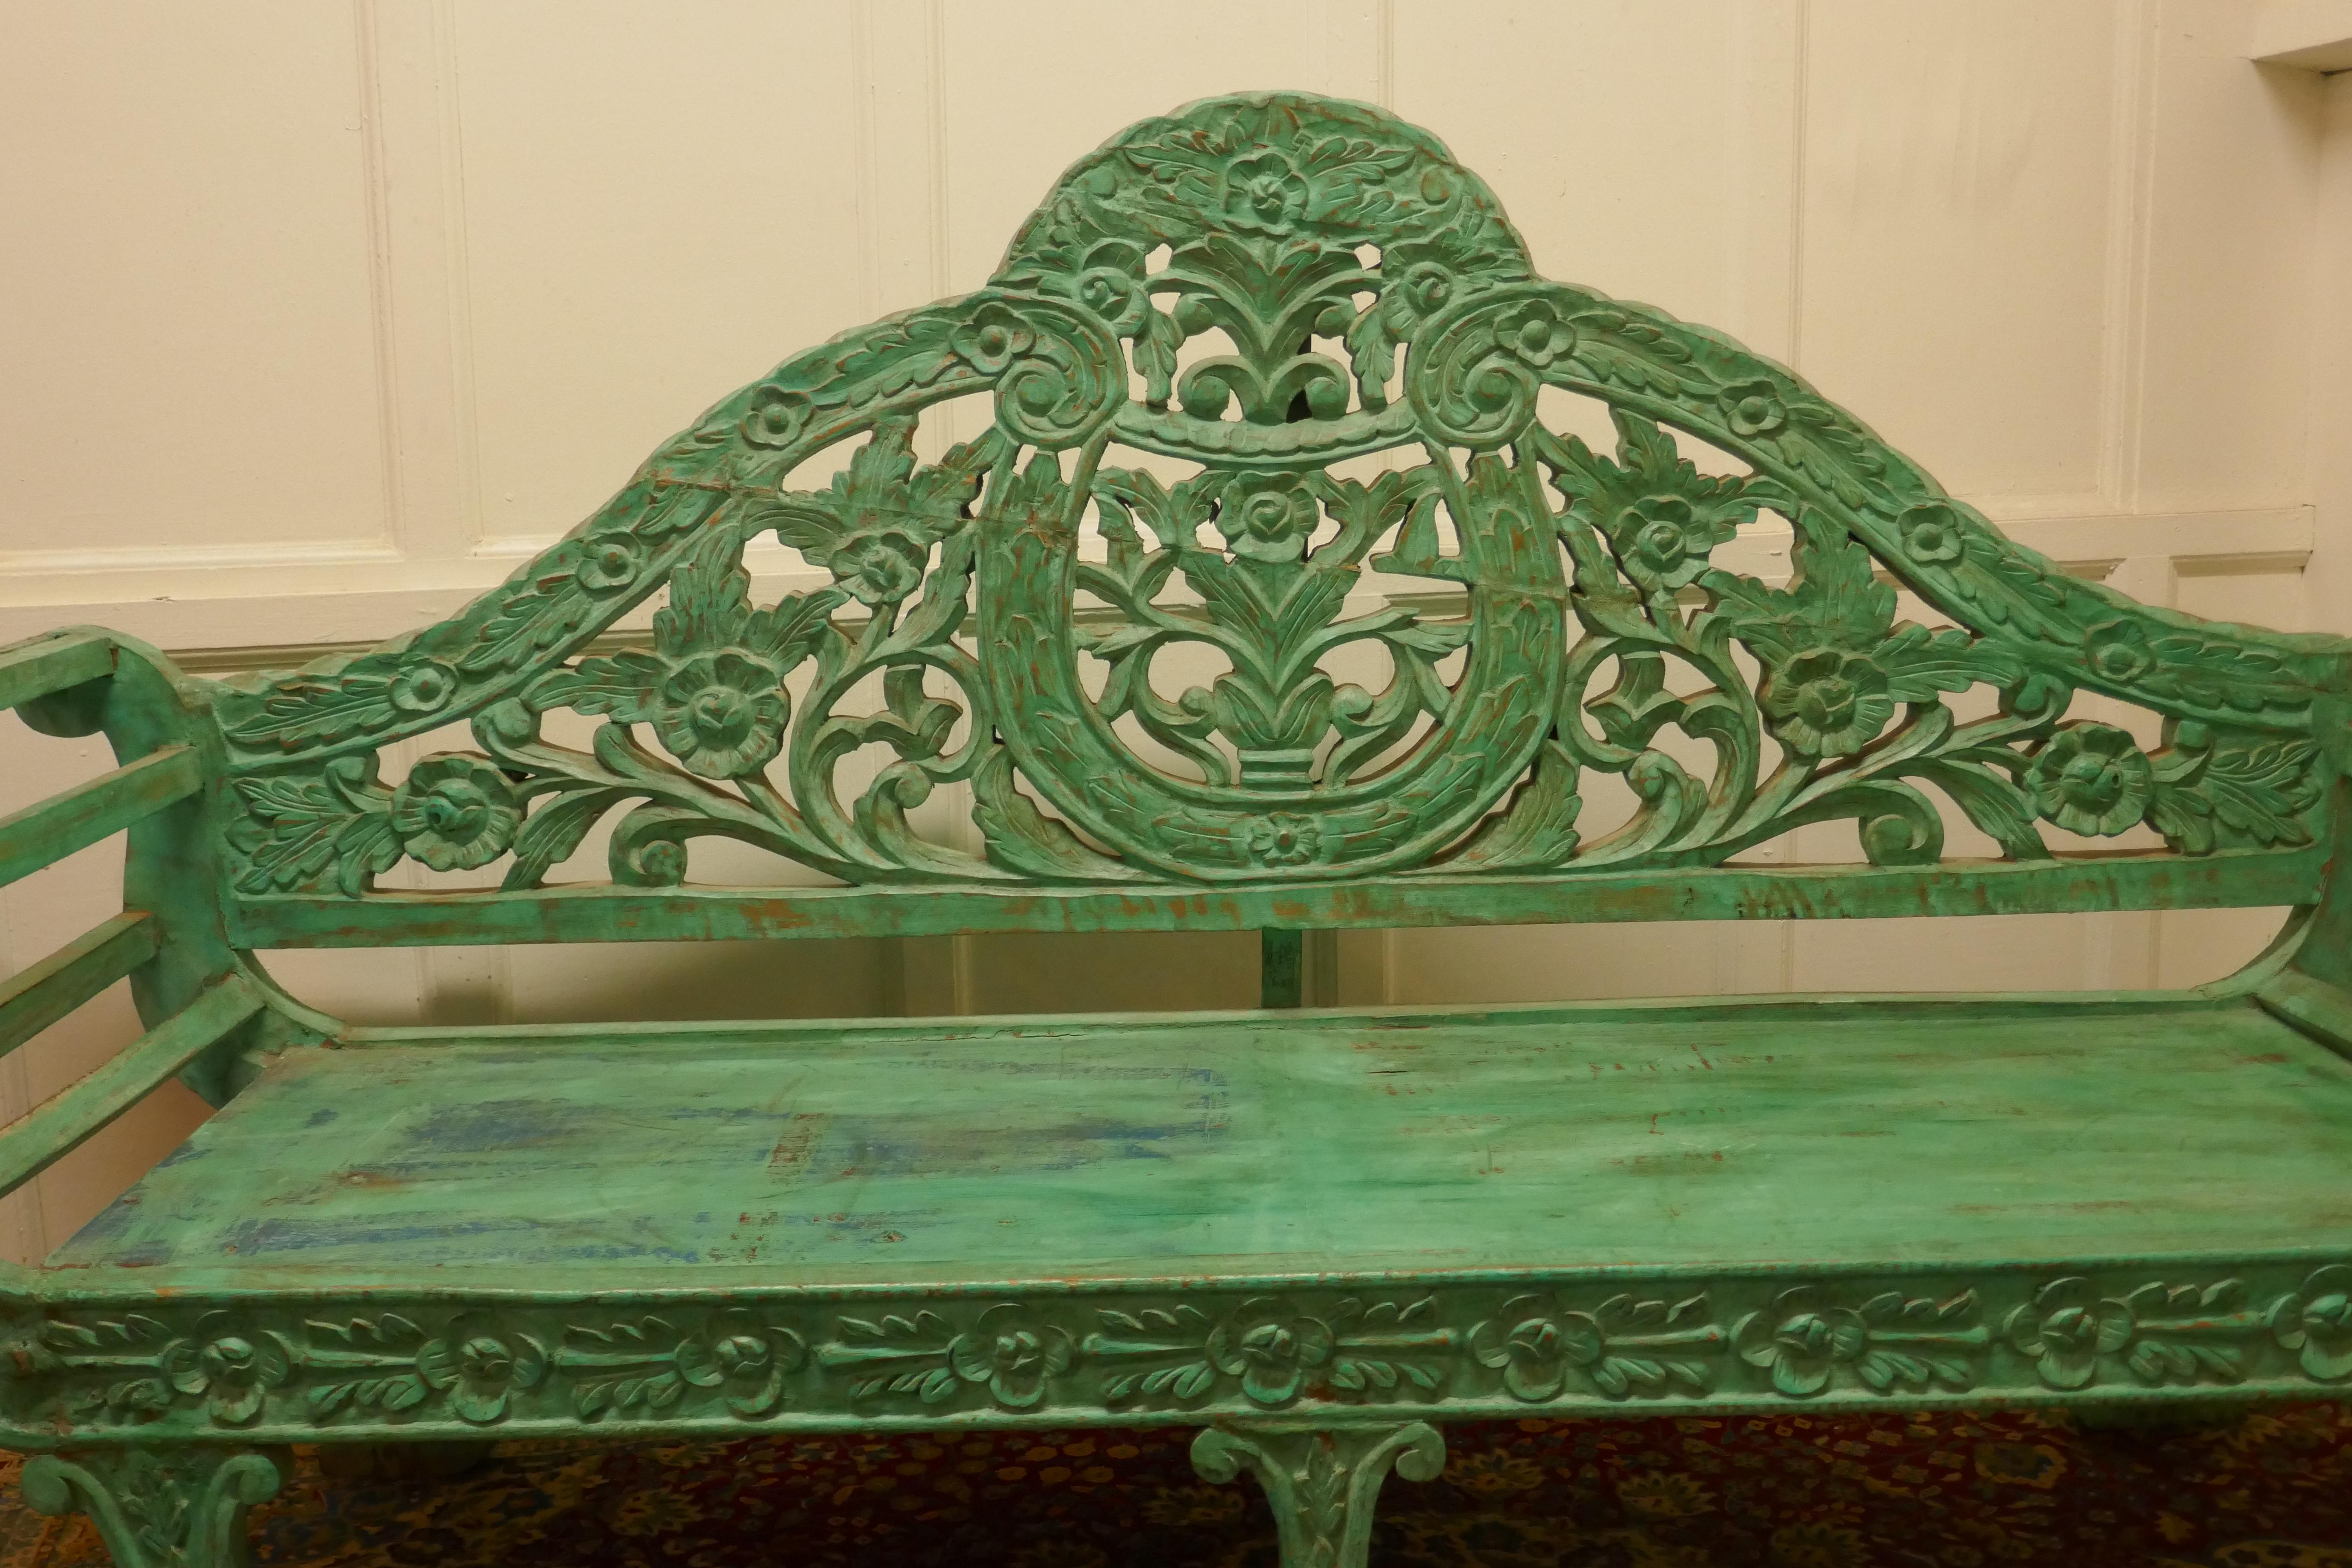 Large Anglo Indian Teak Carved Painted Settee, Bench

This is an unusual piece, the settee or bench is painted in green and has has a very intricately carved high back 
The bench is in good all round condition and has an outward curved shape to the